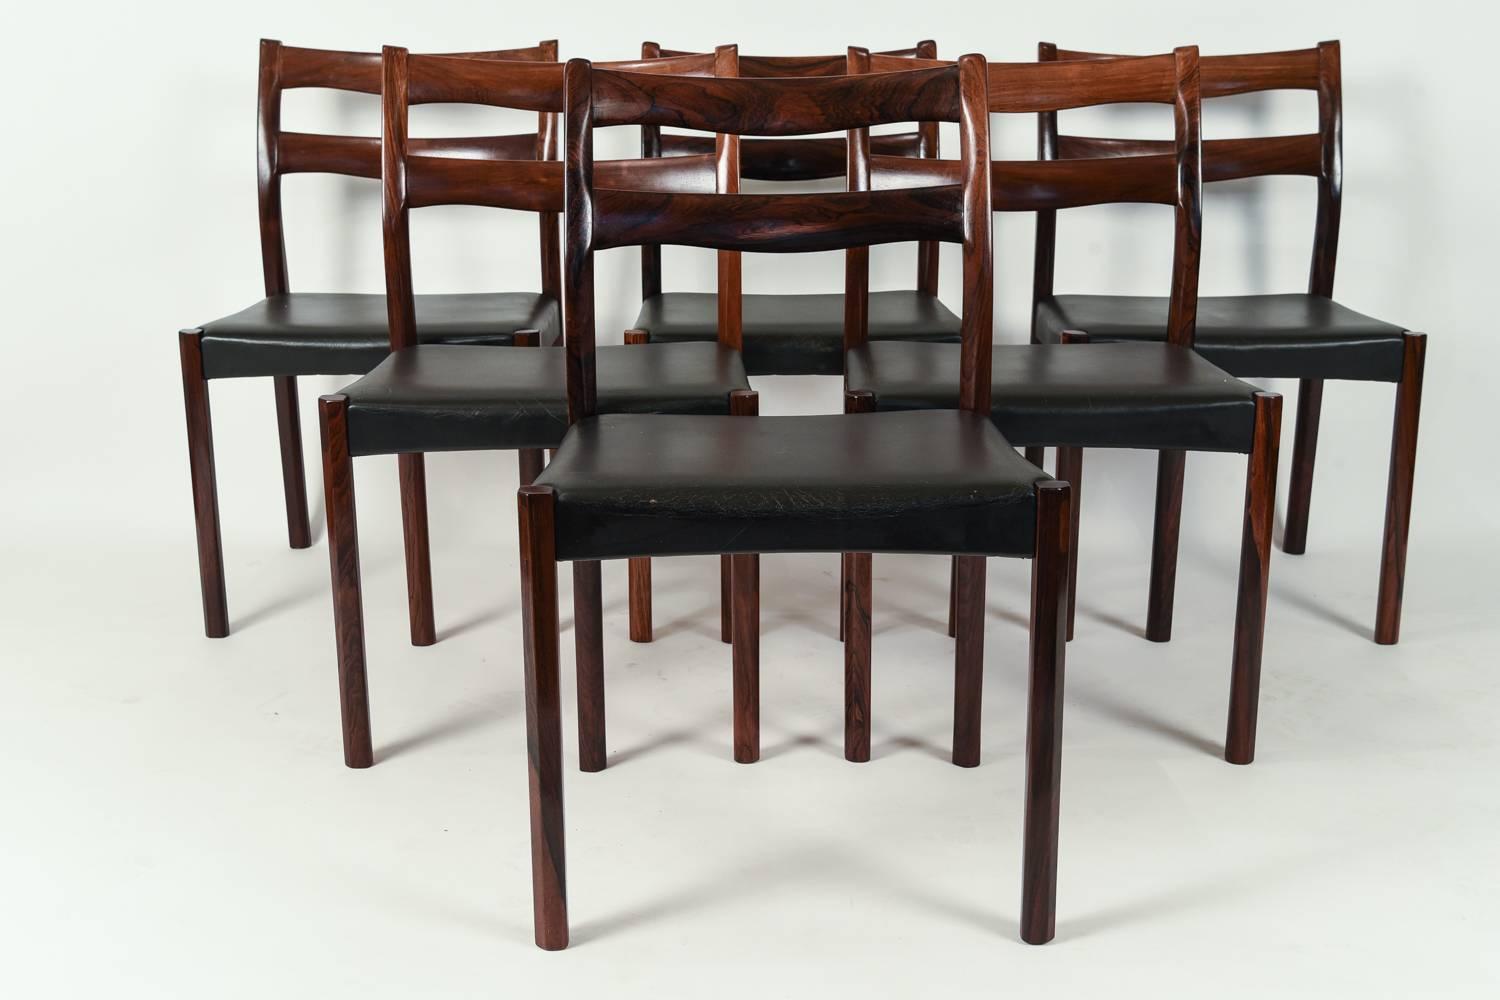 A beautiful set of six side or dining chairs in the style of Ole Wanscher. Made of rosewood and upholstered in black leather.